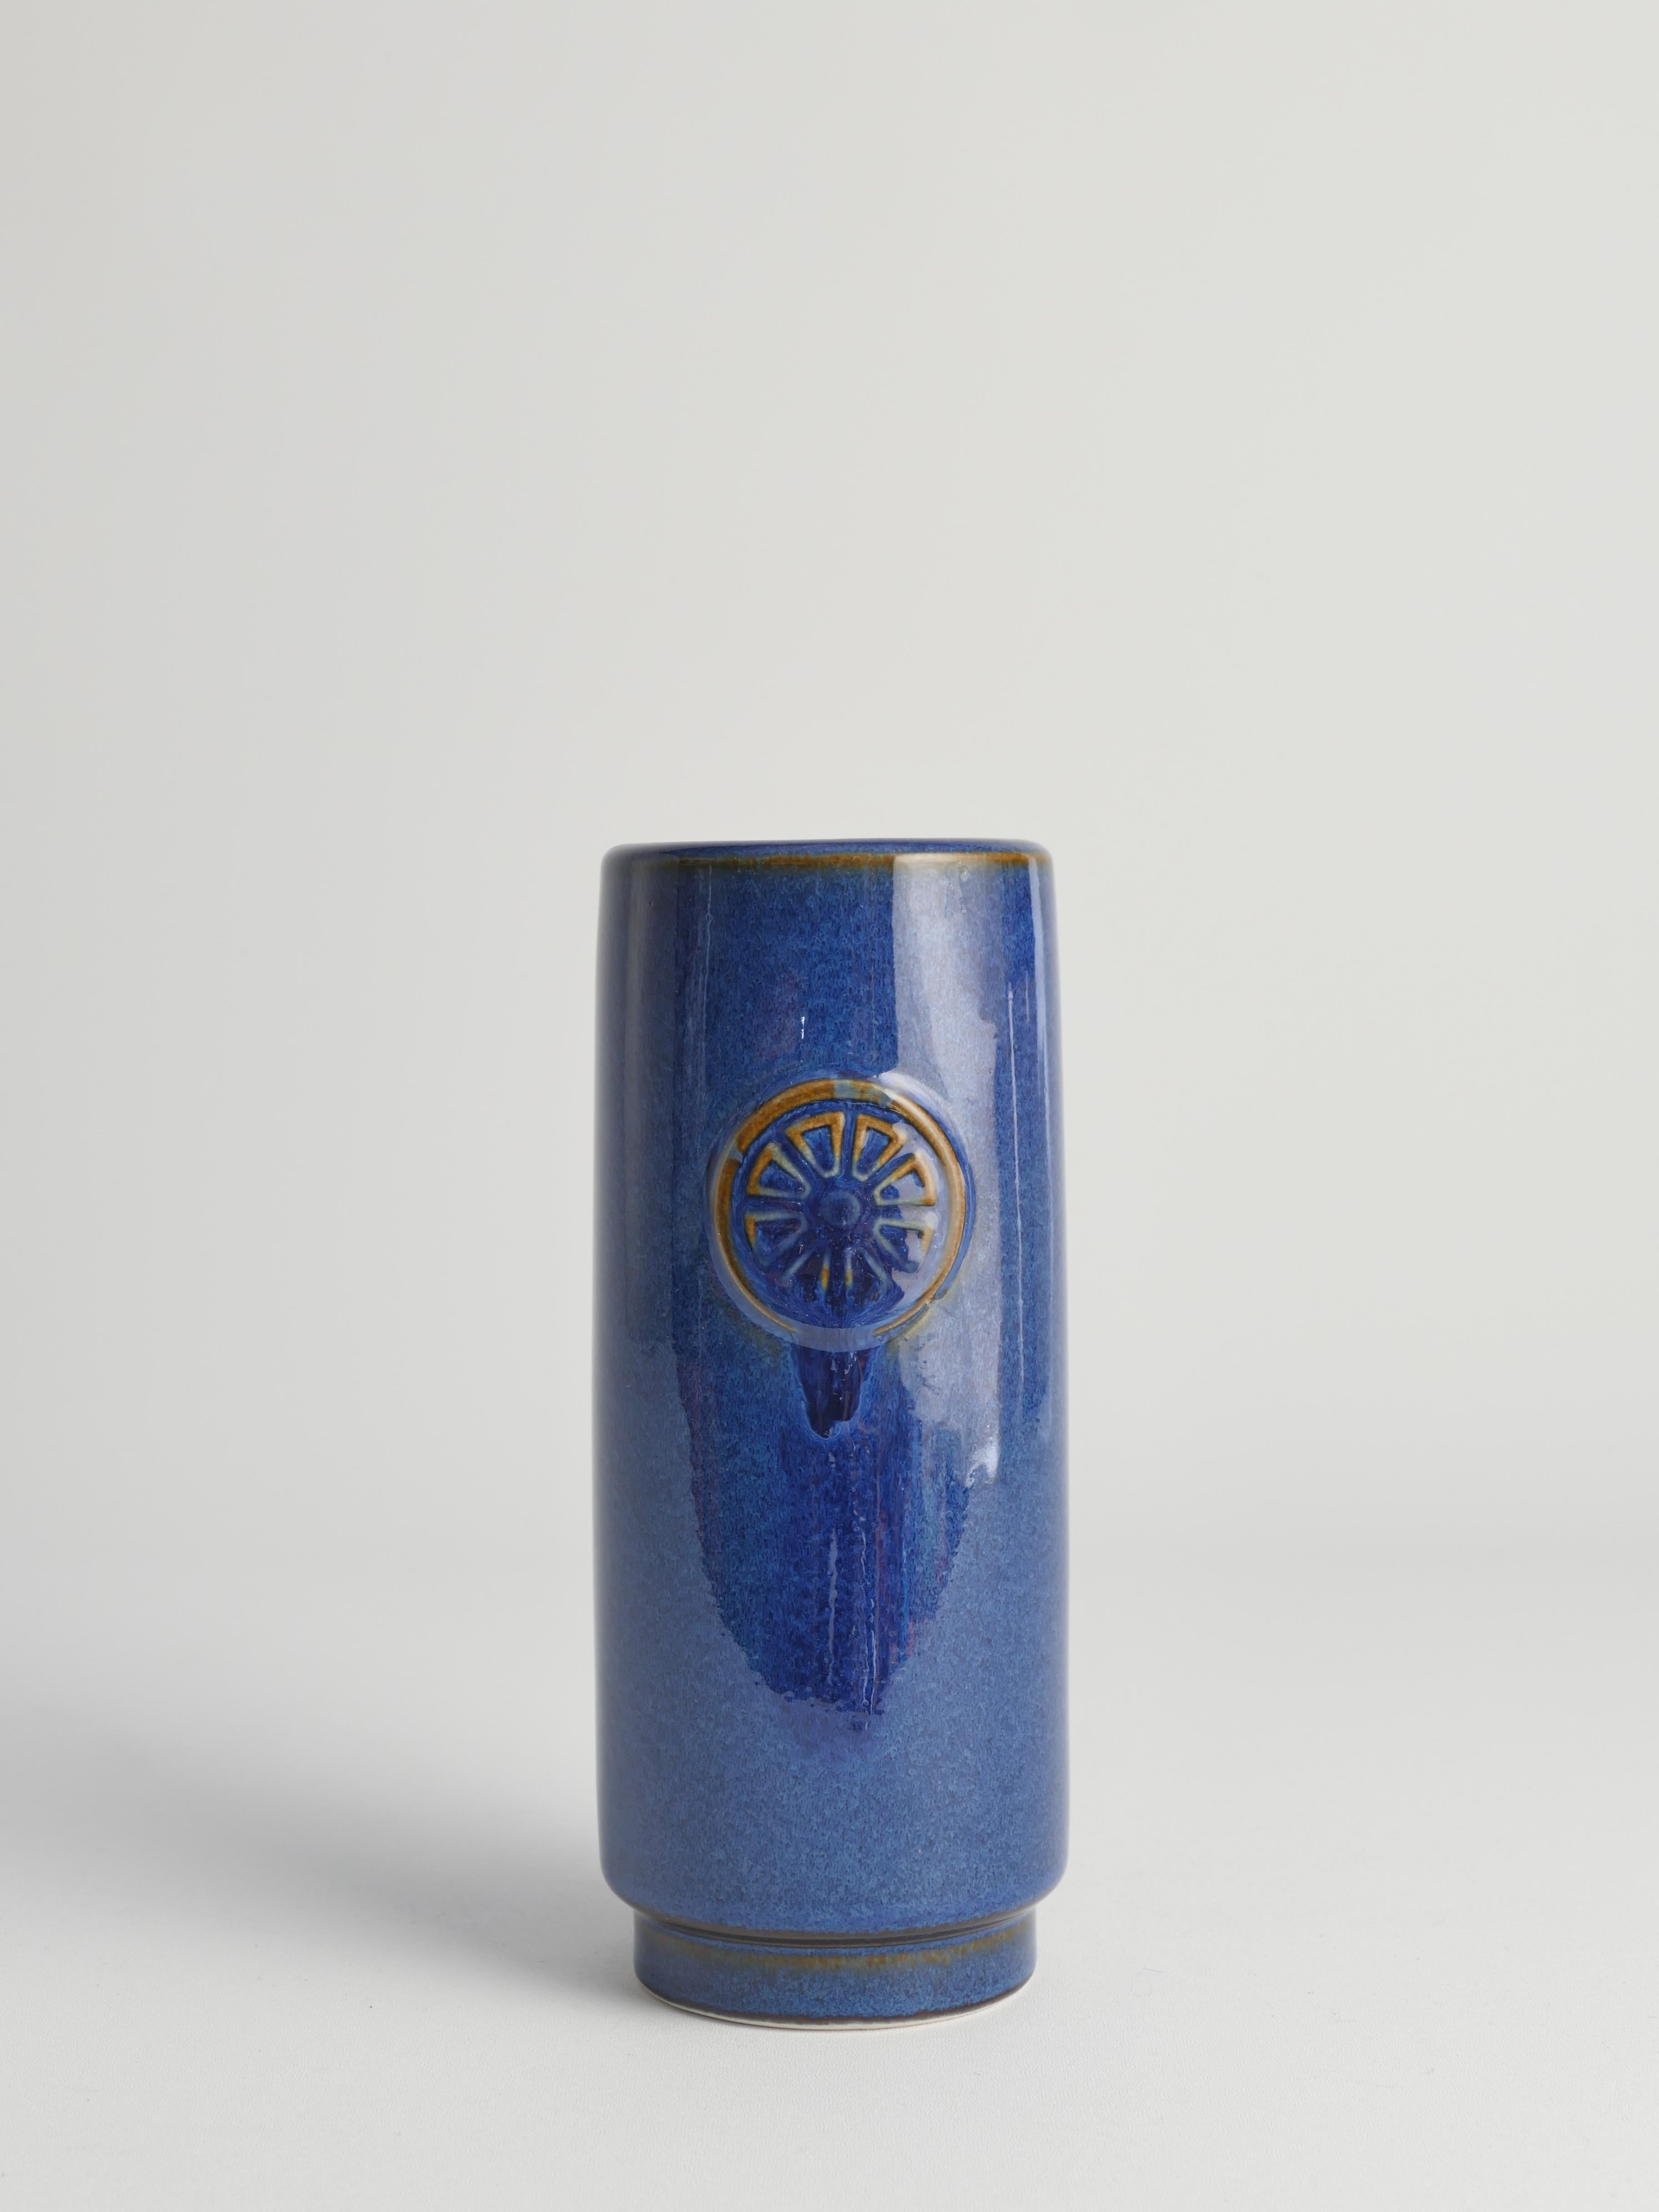 Scandinavian Modern Blue Stoneware Vase from Nordlys Series by Maria Philippi for Søholm, 1960s For Sale